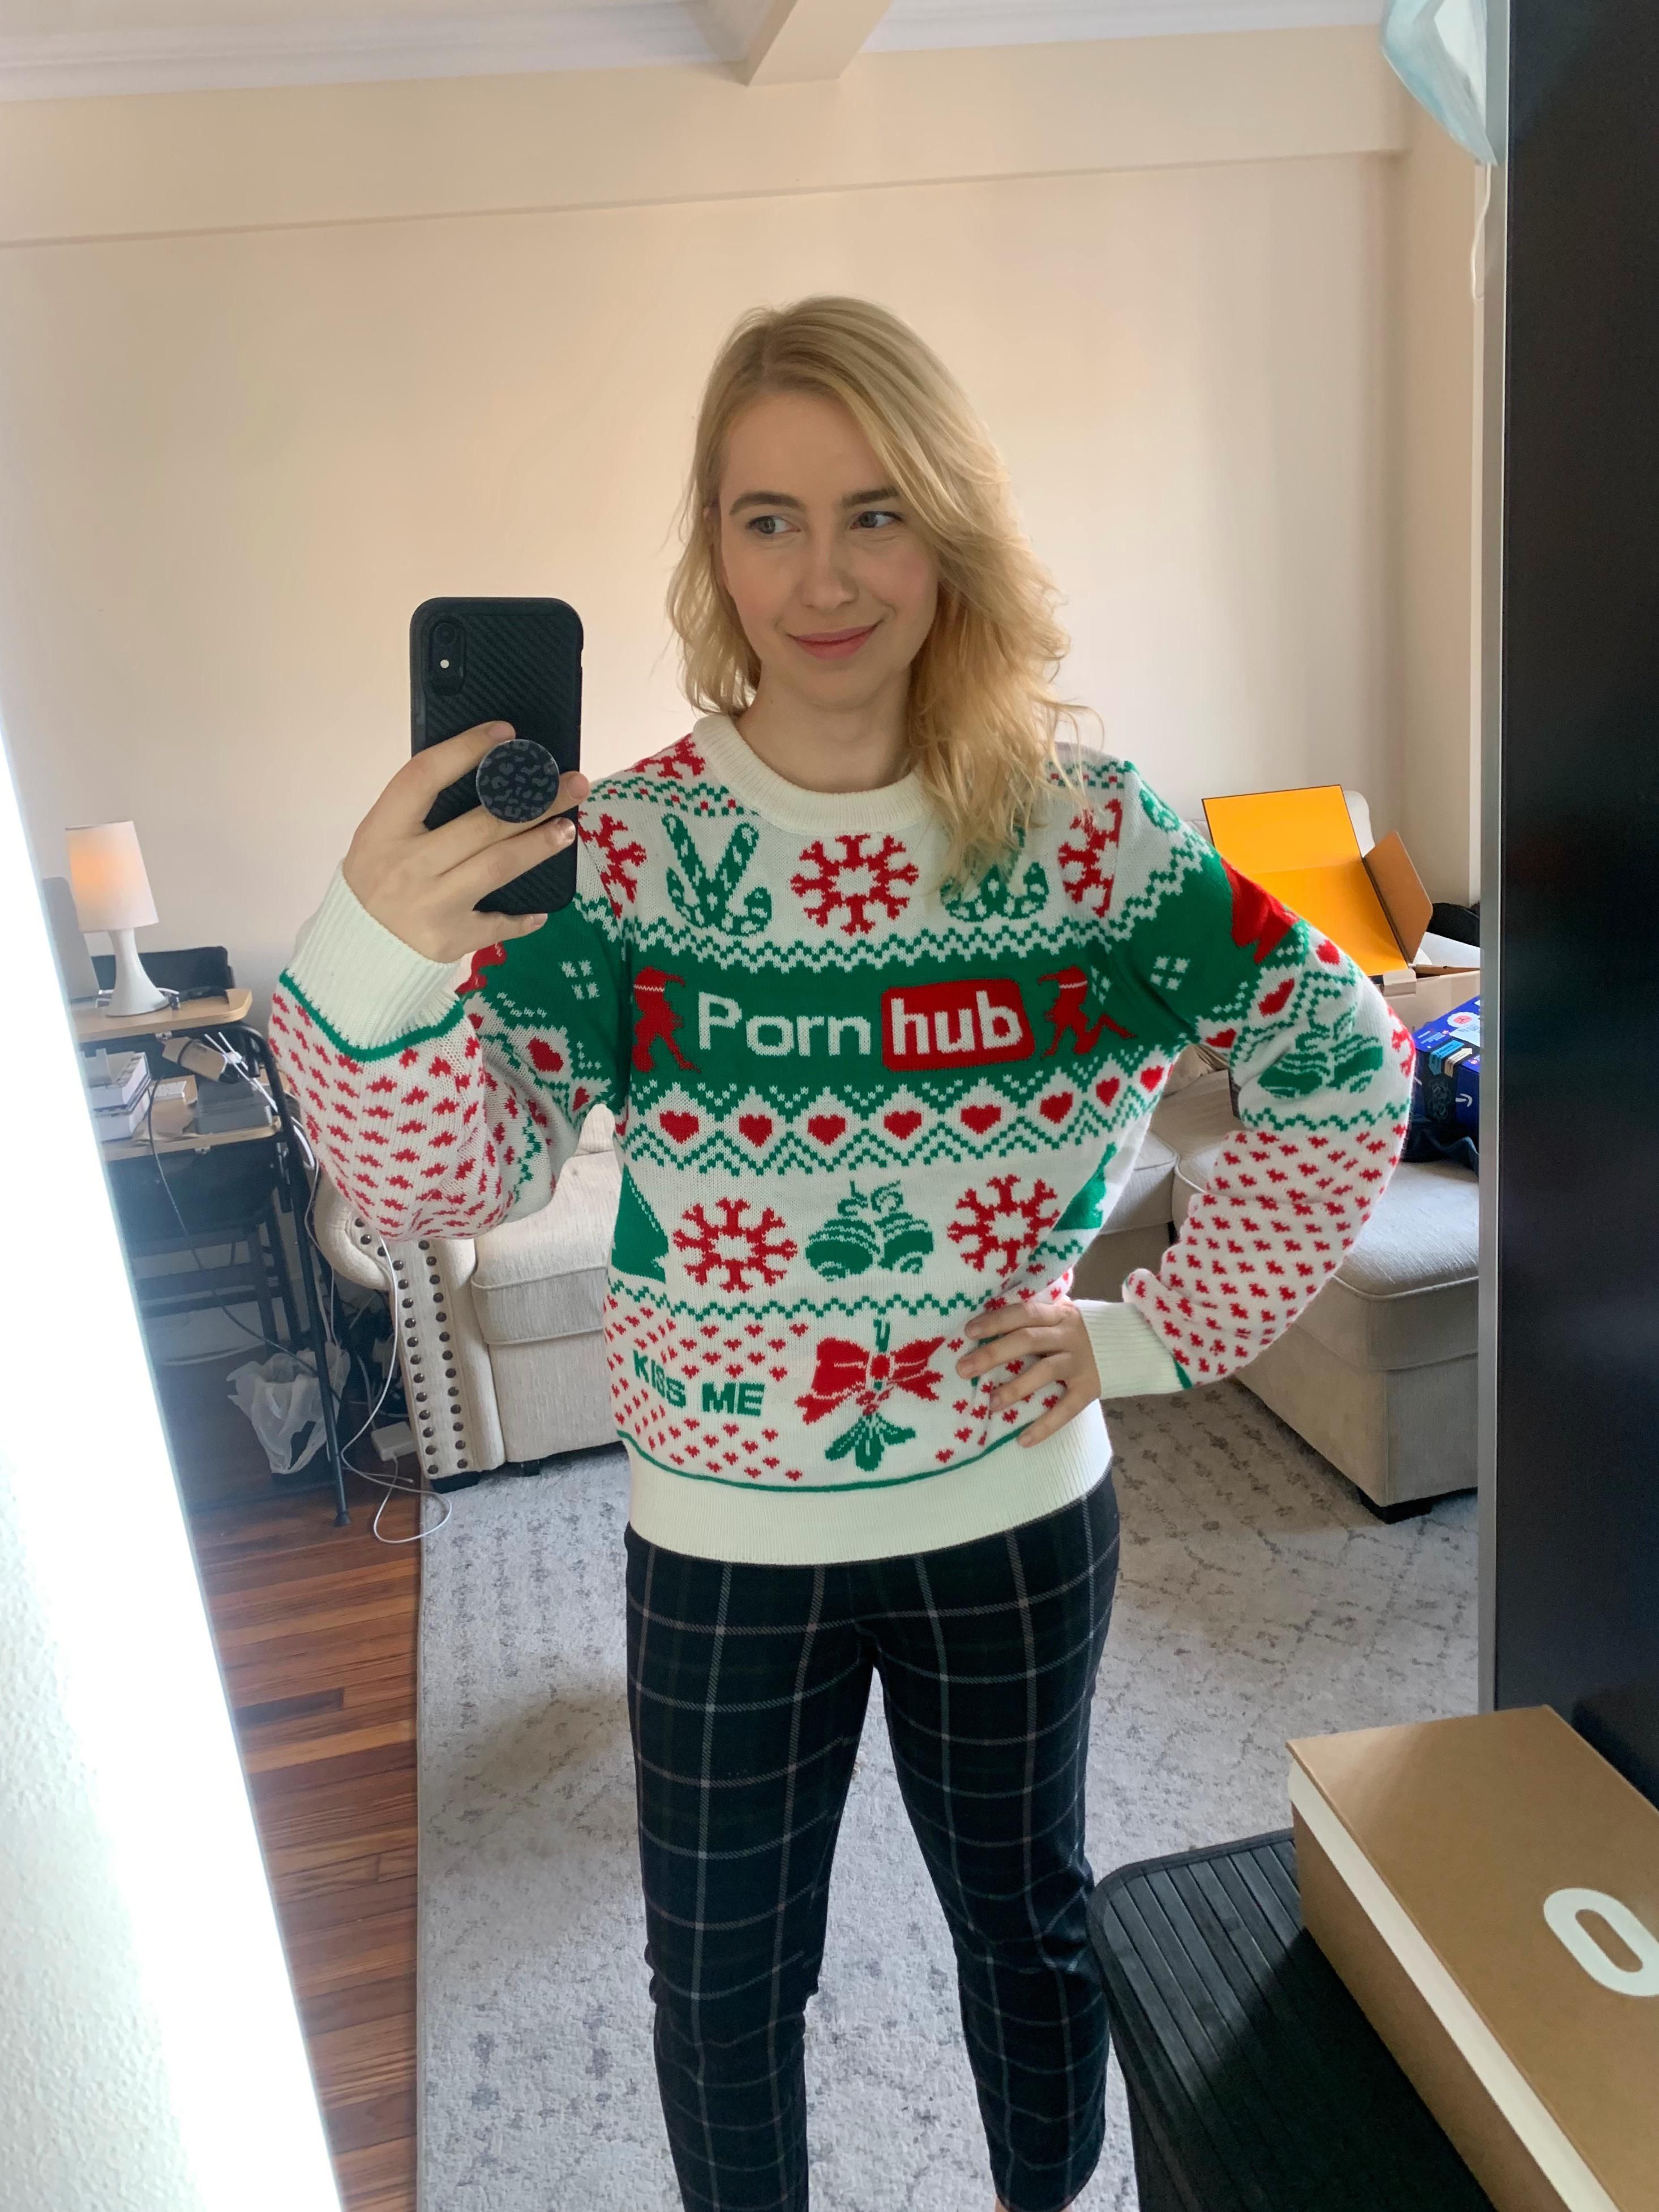 Just a family friendly holiday sweater